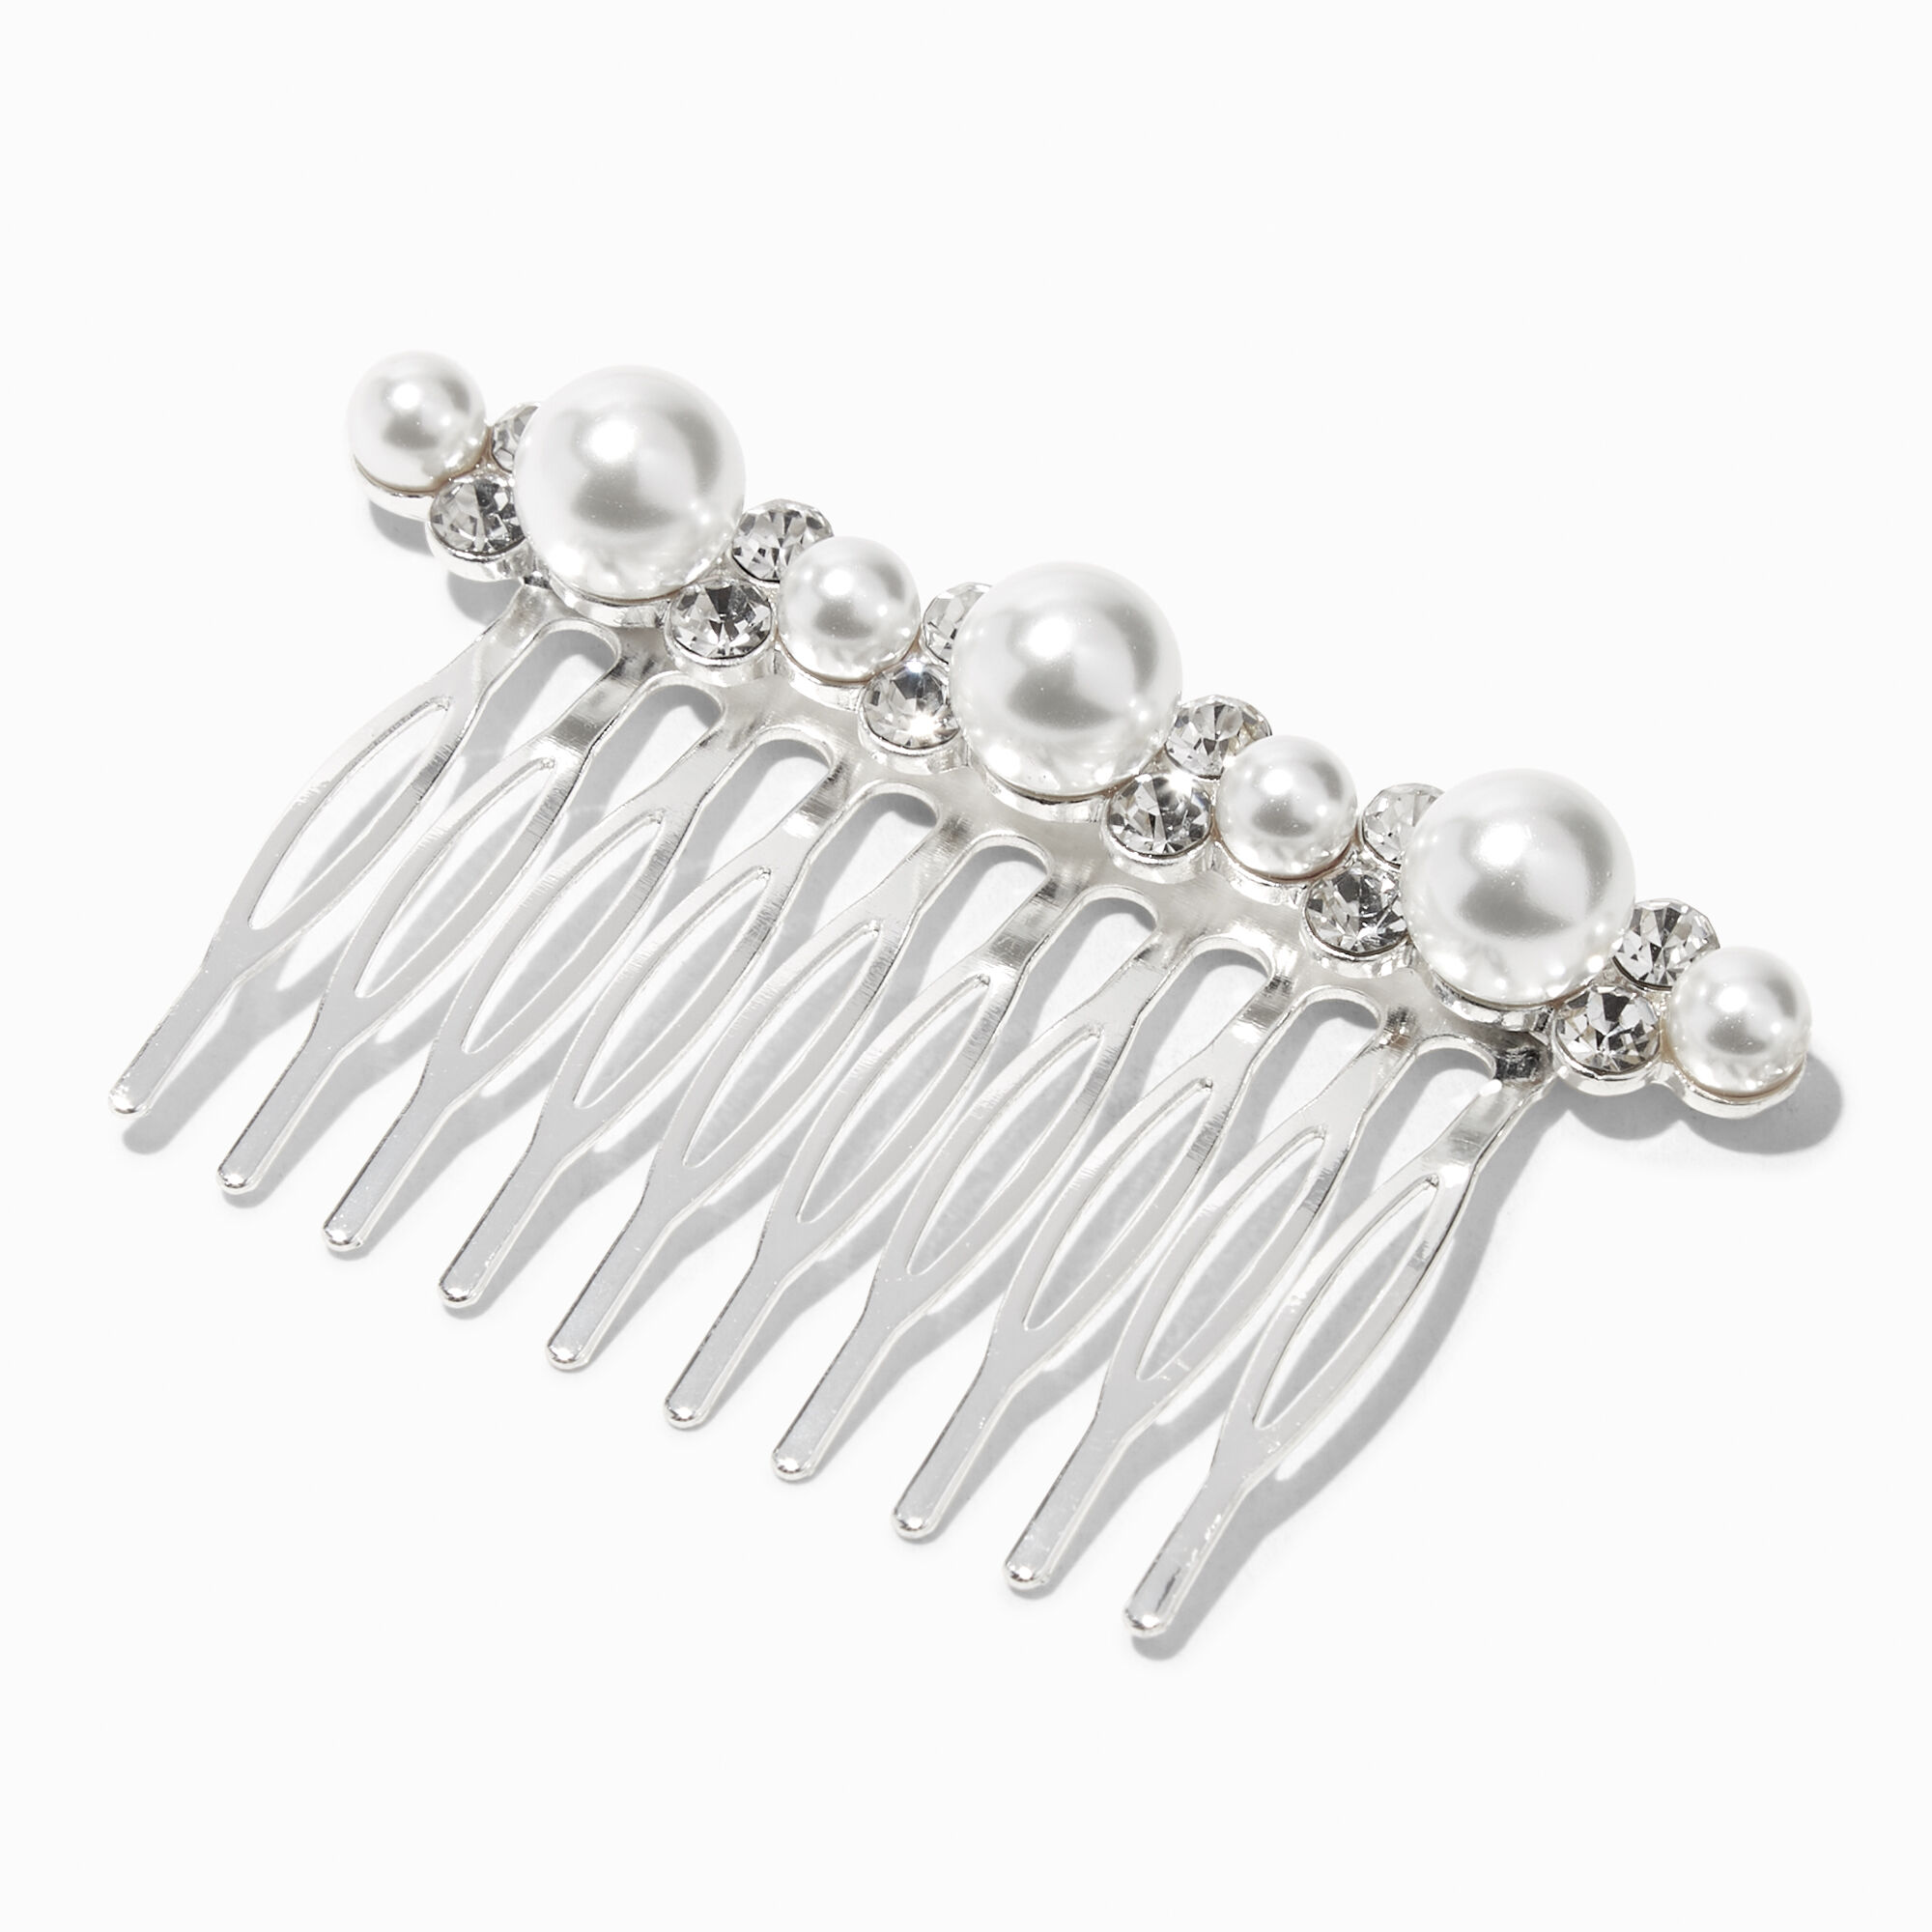 Silver Crystal & Pearl Hair Comb | Claire's US